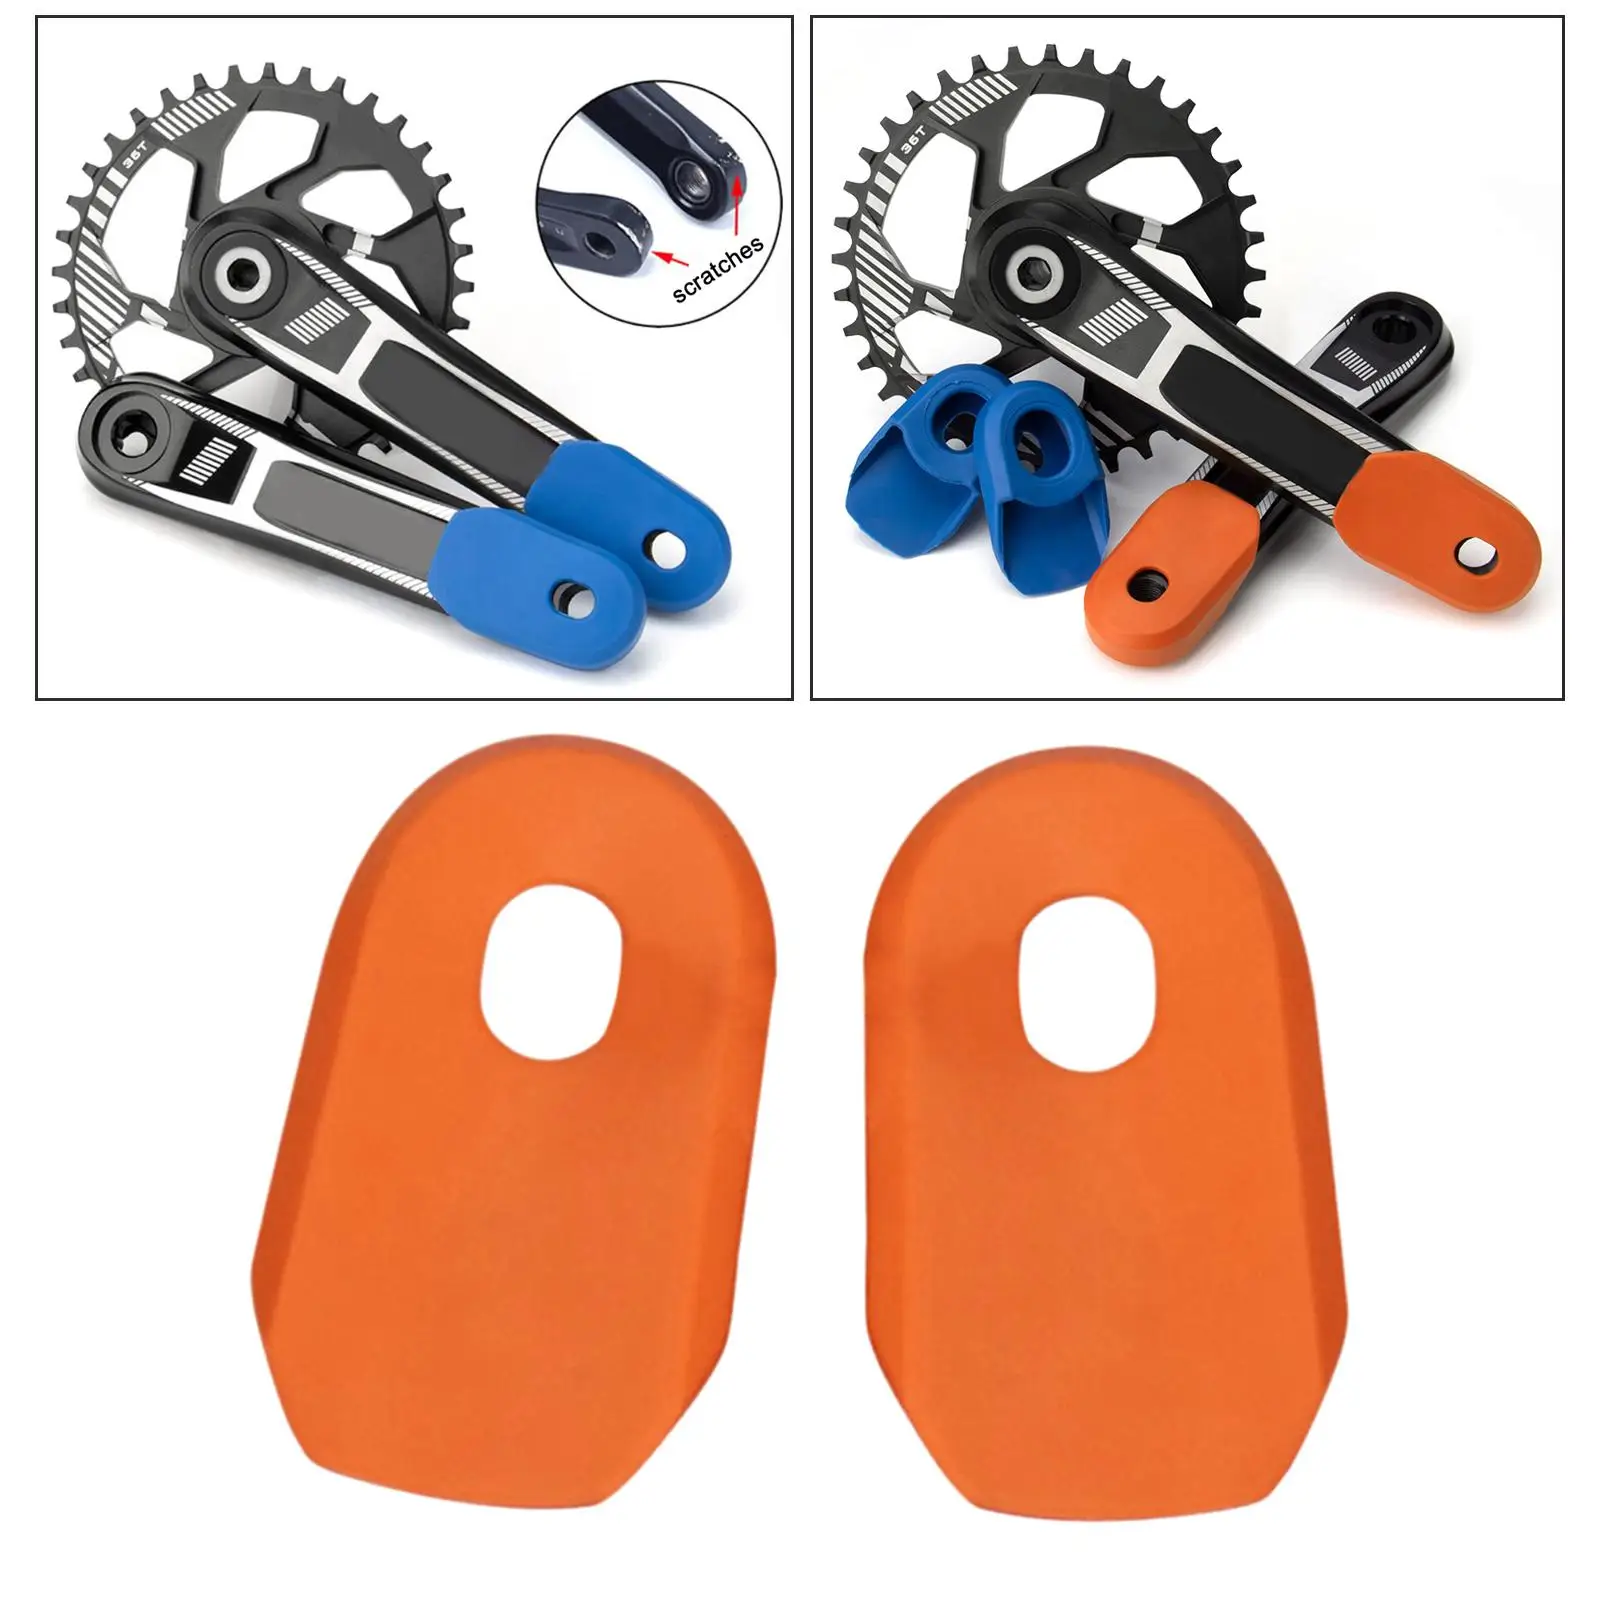 2x bicycle crank arm protector bicycle crank boots cover cycling